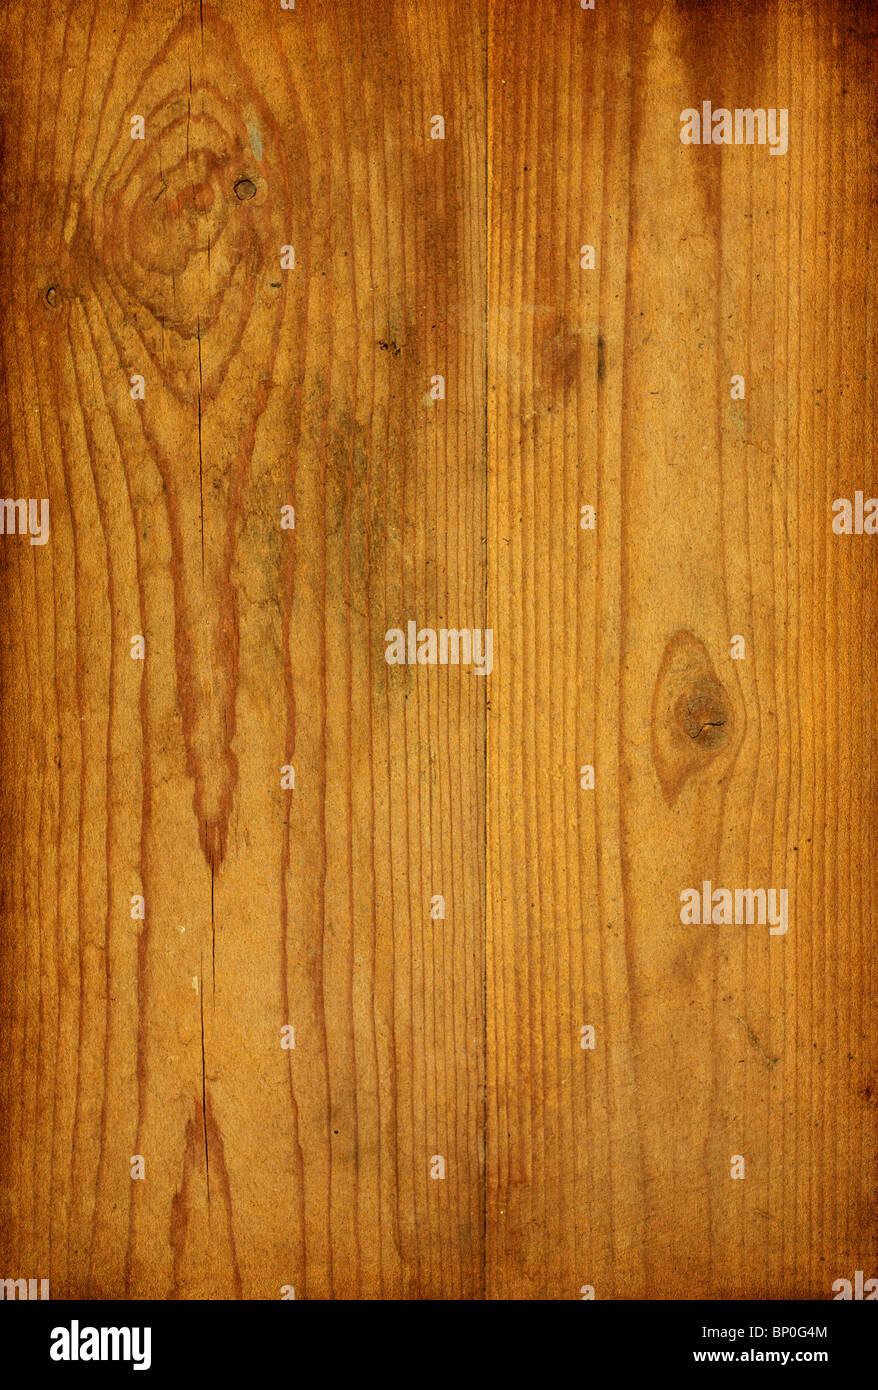 Wood texture. Abstract background. Stock Photo